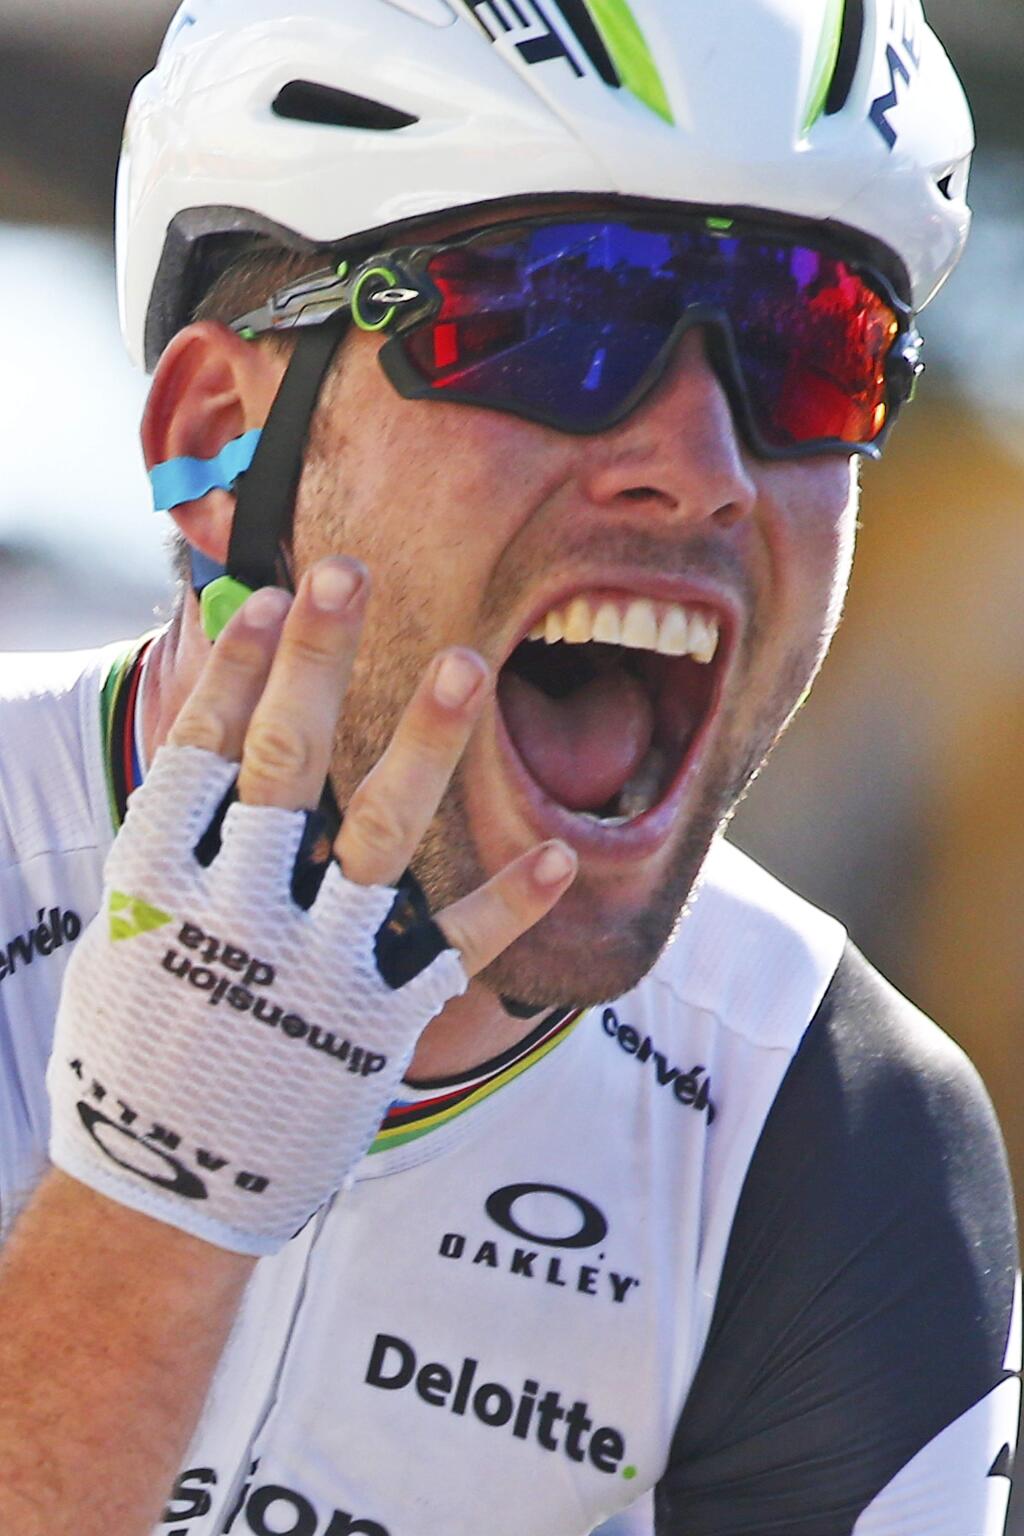 Britain's Mark Cavendish flashes four fingers for his fourth victory in this year's Tour de France as he crosses the finish line to win the fourteenth stage of the Tour de France cycling race over 208.5 kilometers (129.2 miles) with start in Montelimar and finish in Villars-les-Dombes, France, Saturday, July 16, 2016. (AP Photo/Peter Dejong)